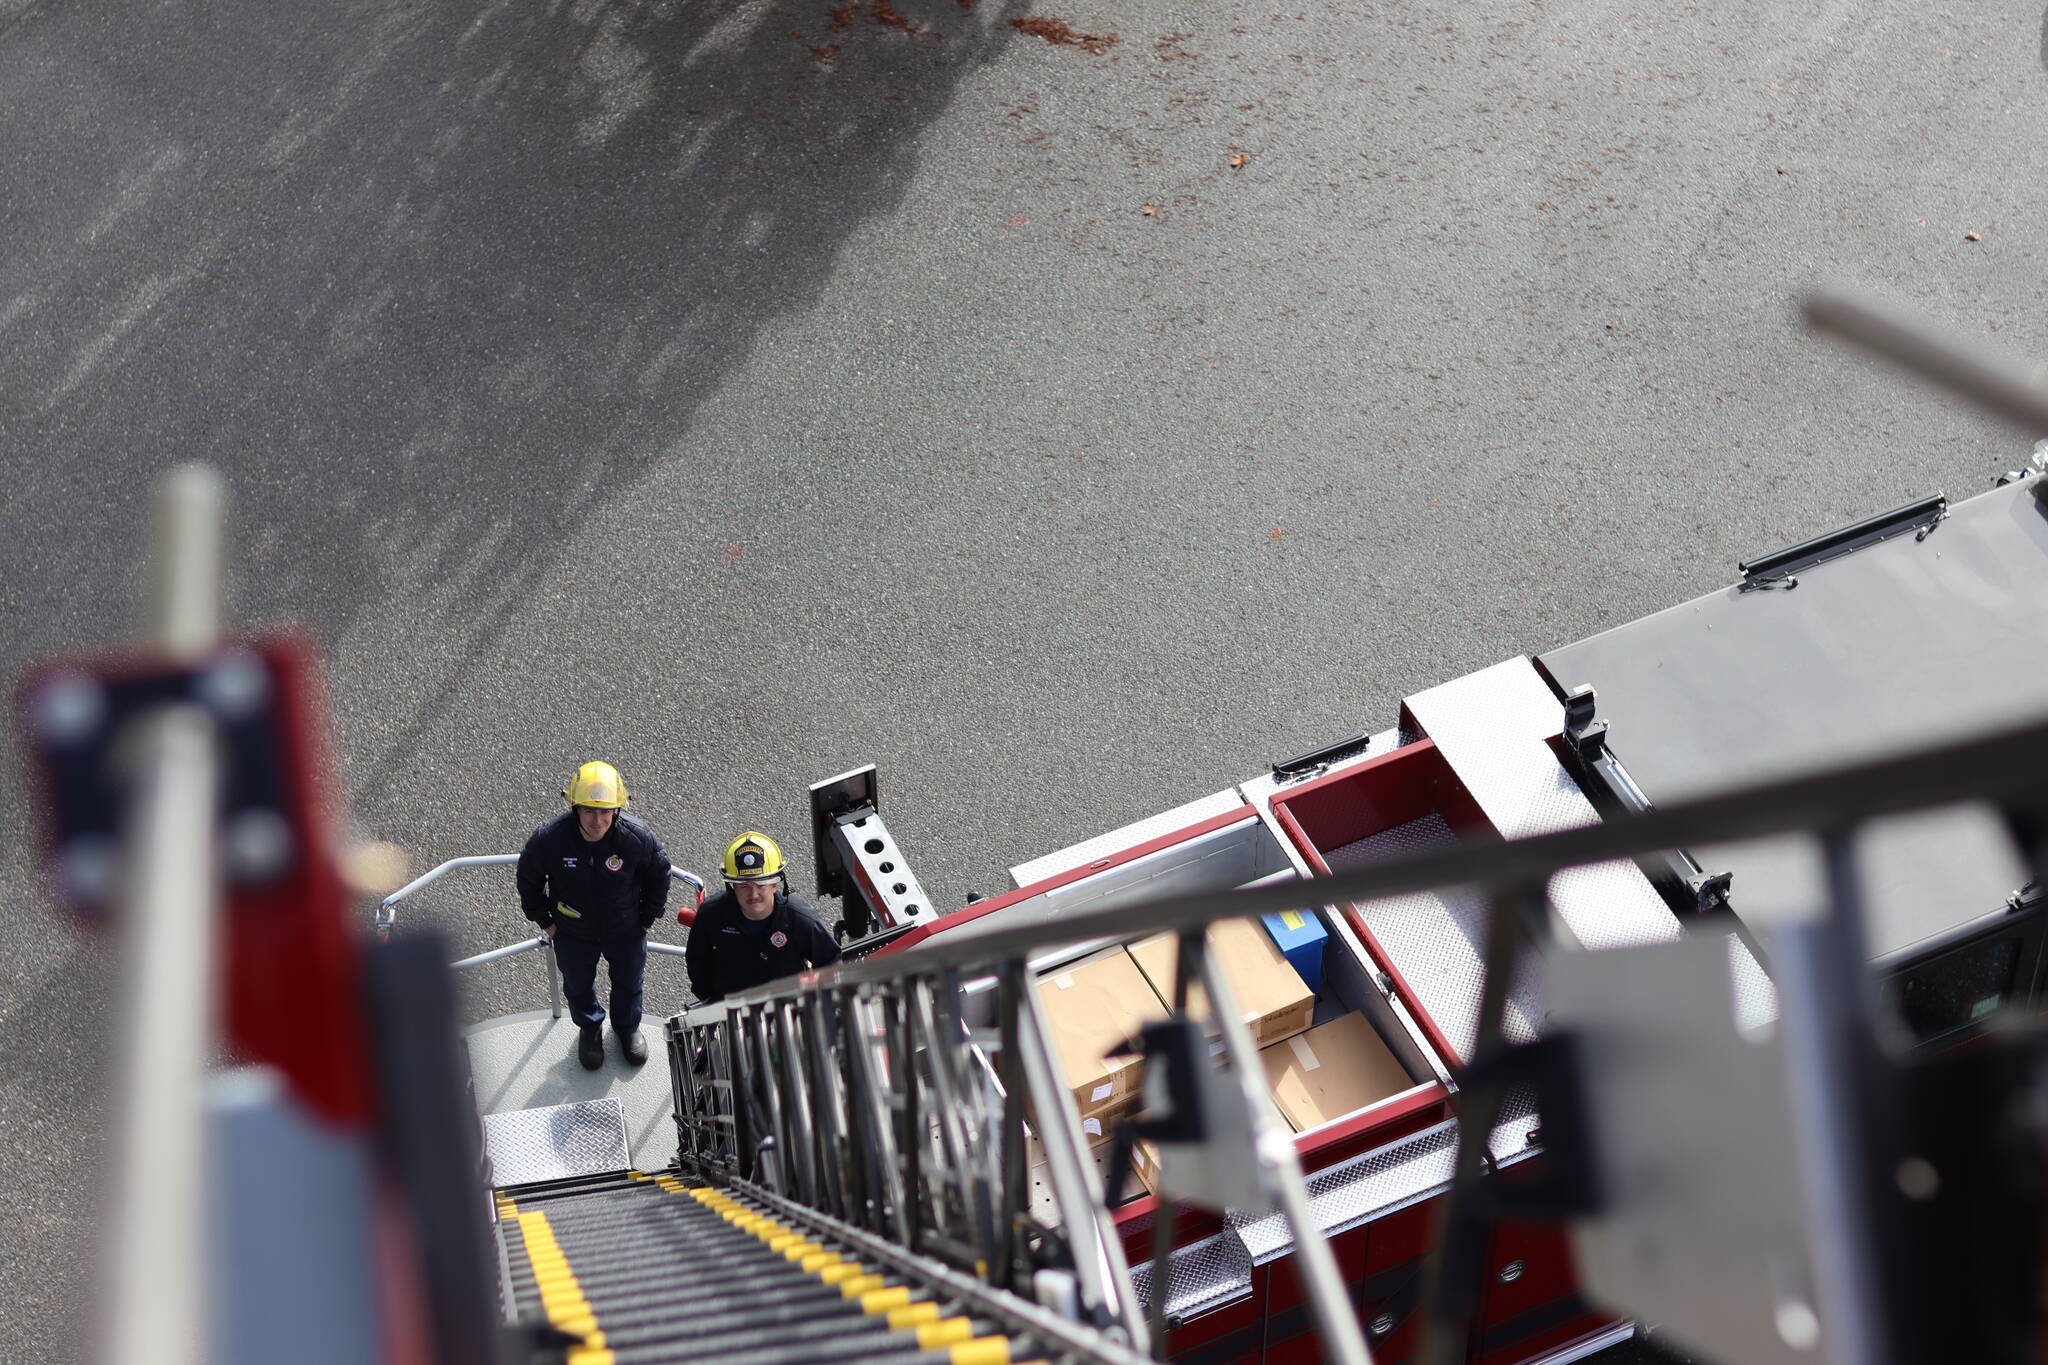 Jonson Kuhn / Juneau Empire 
Capital City Fire/Rescue engineer Peter Flynn and firefighter Connor Hoyt stand at the bottom of the department’s new truck ladder on Thursday, Oct. 6 during training operations at the Glacier Fire Station.